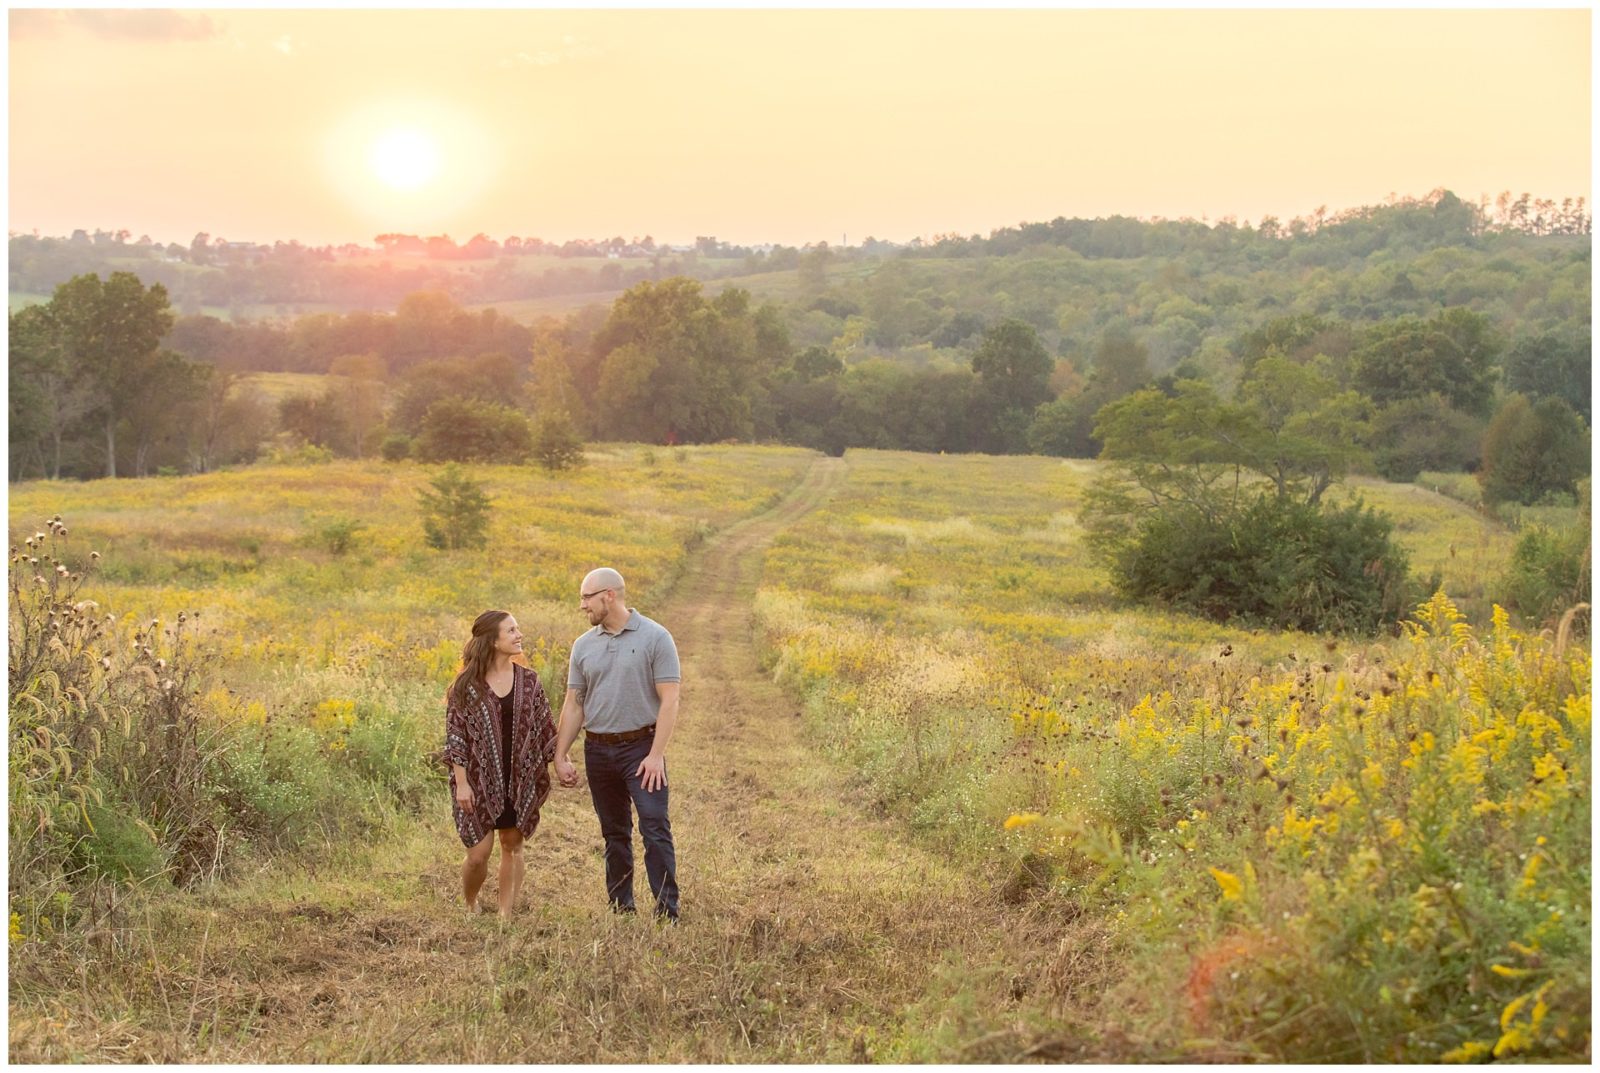 Fall engagement outdoor session at Shaker Village in Harrodsburg, Kentucky.